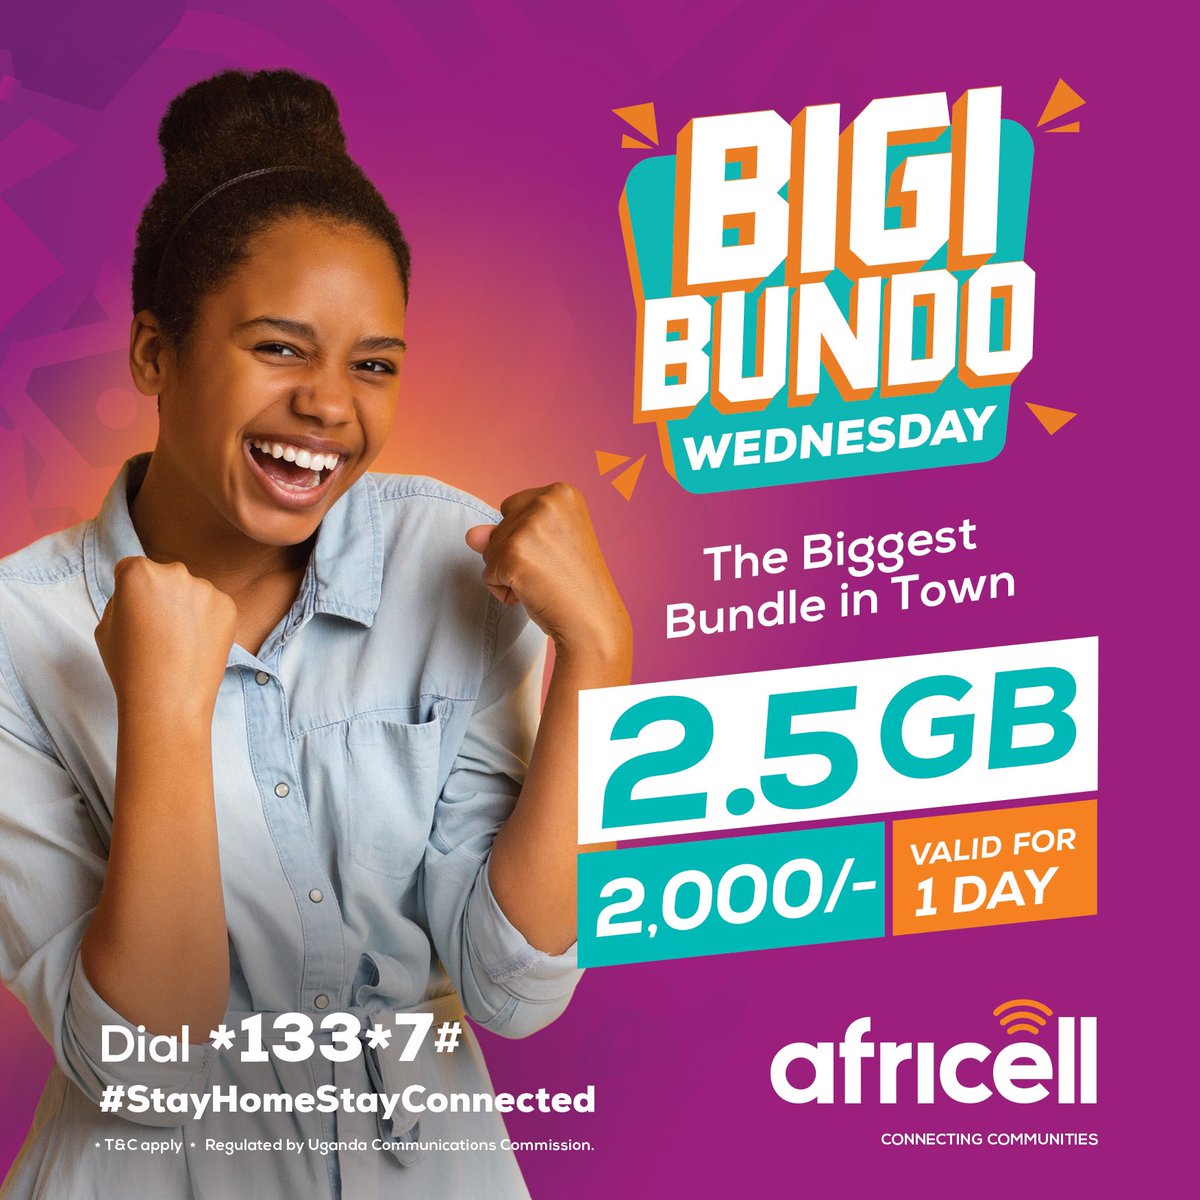 Start your day with a Wednesday #BigiBundo At just UGX 2,000 get 2.5GB of Data valid for a day. Dial *133*7# to activate. #ConnectingCommunities